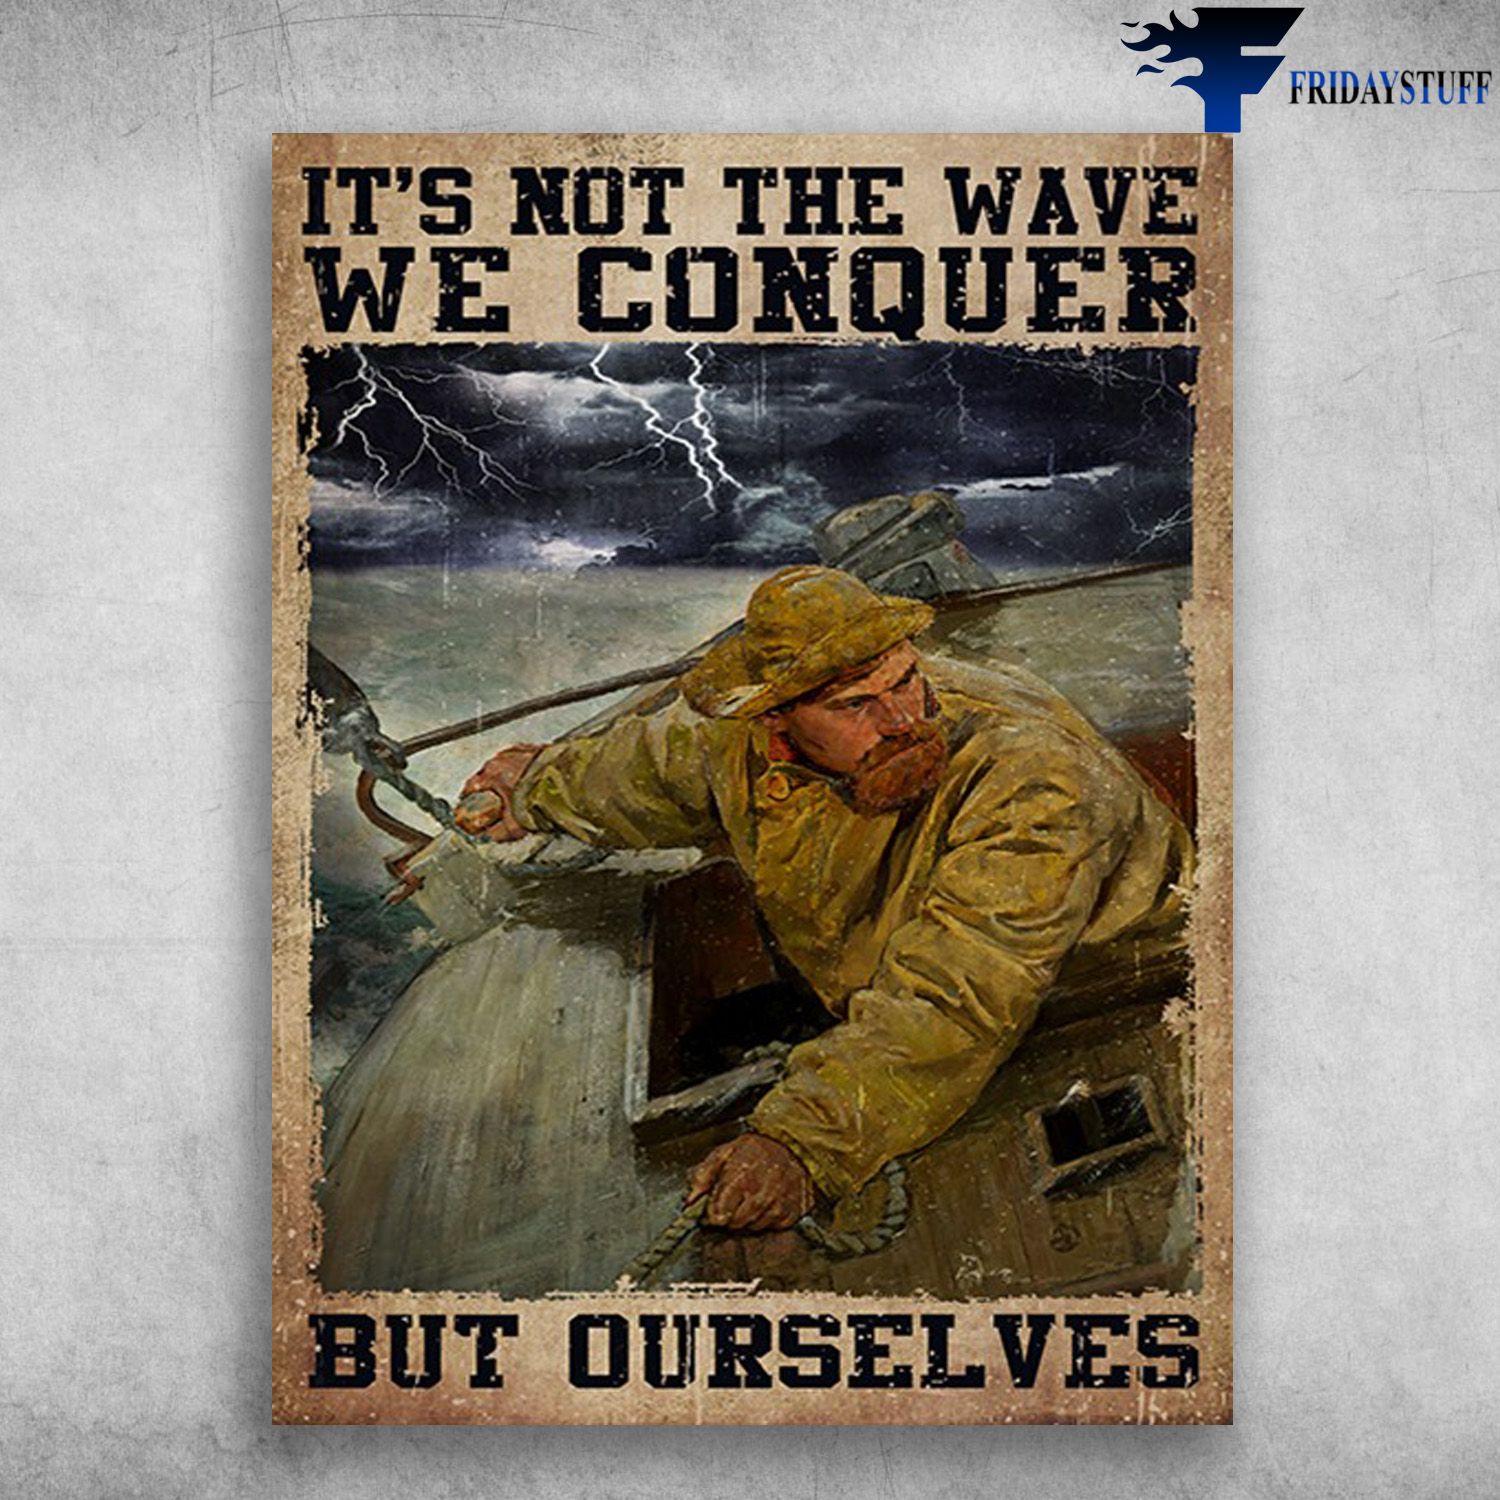 Old Sailor In Storm, Sailor Poster - It's Wave We Conquer, But Ourselves